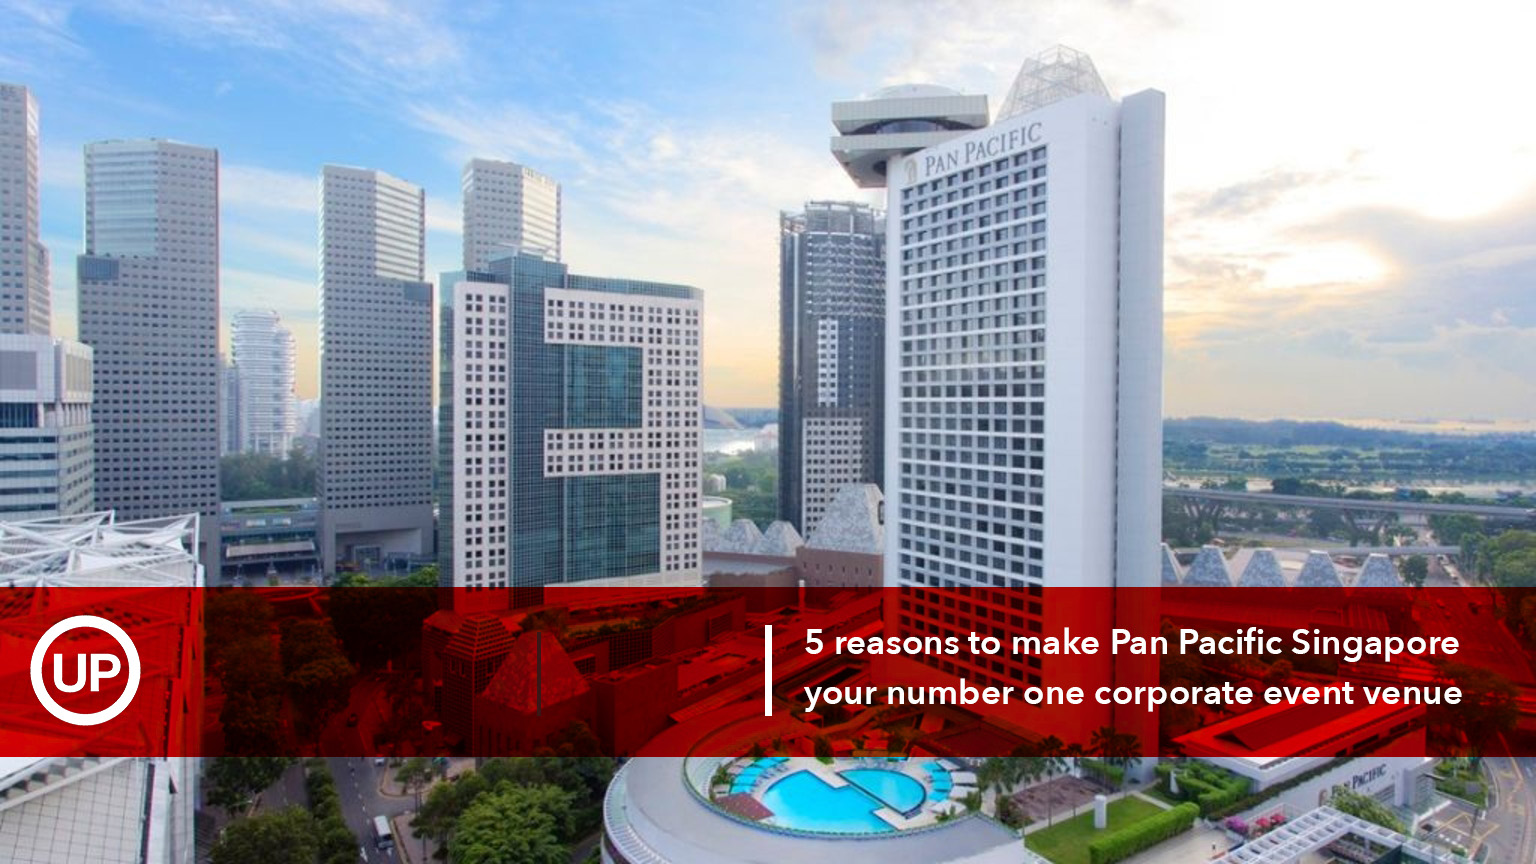 5 reasons to make Pan Pacific Singapore your number one corporate event venue